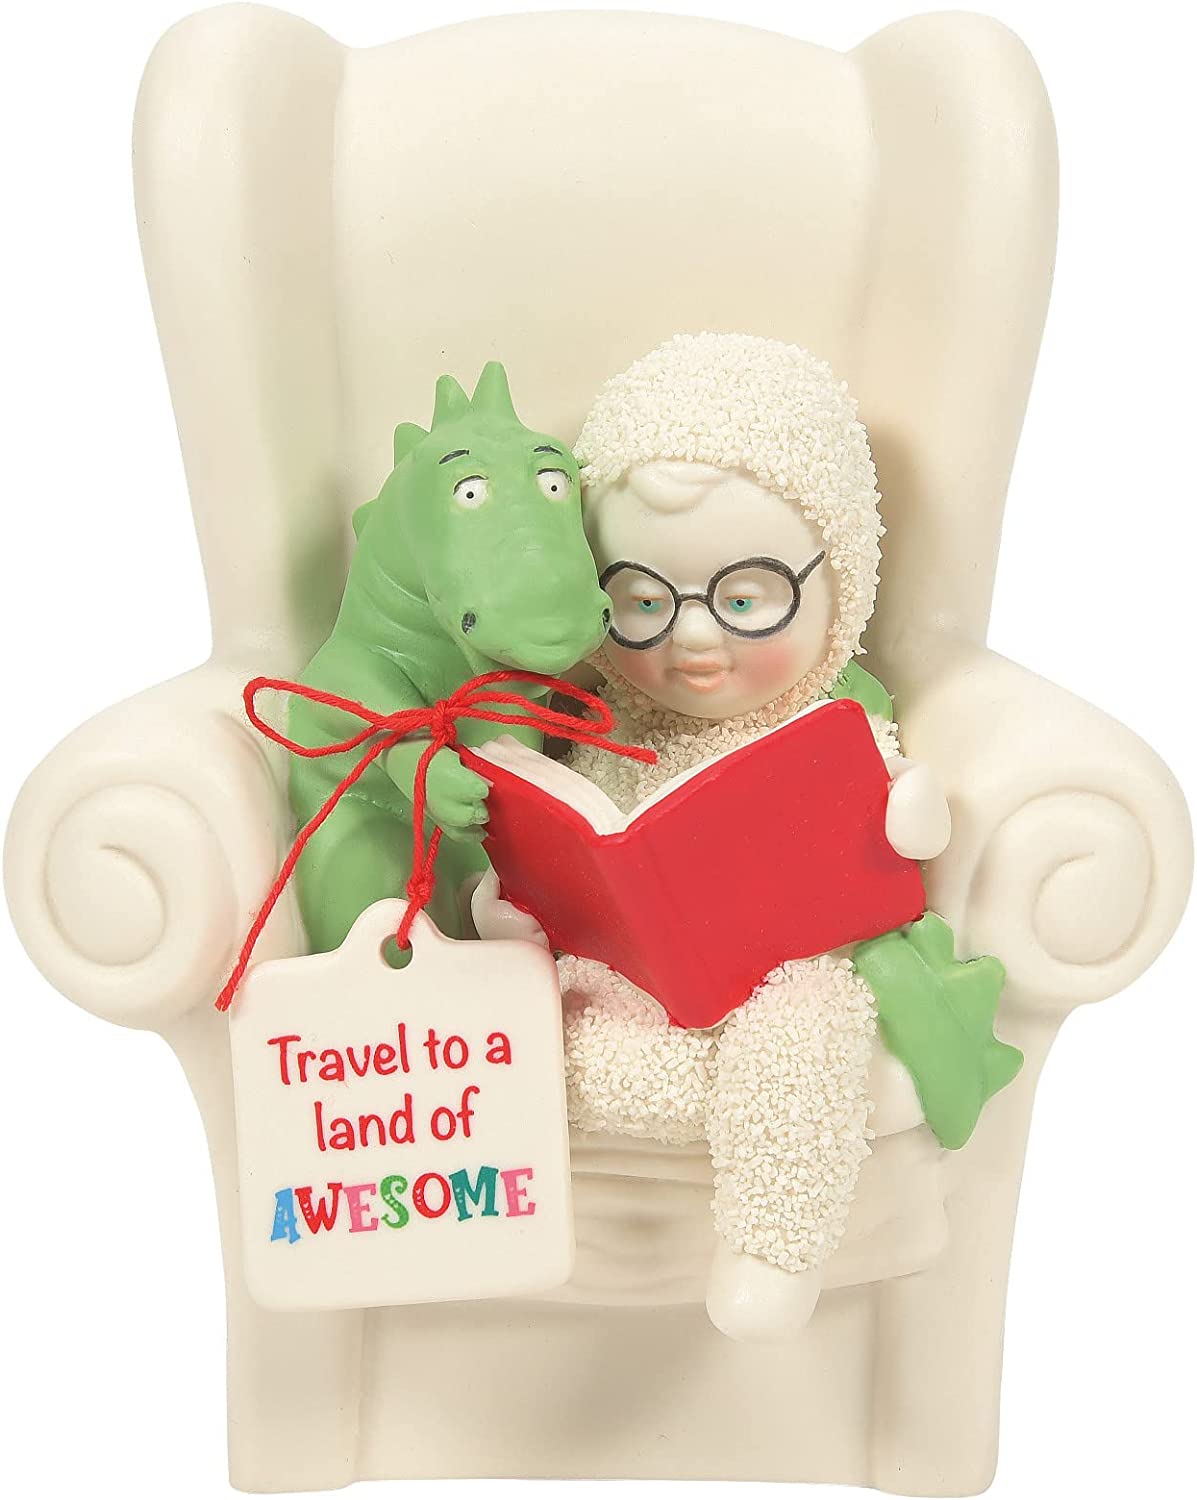 Department 56 Snowbabies Travel to a Land of Awesome Figurine